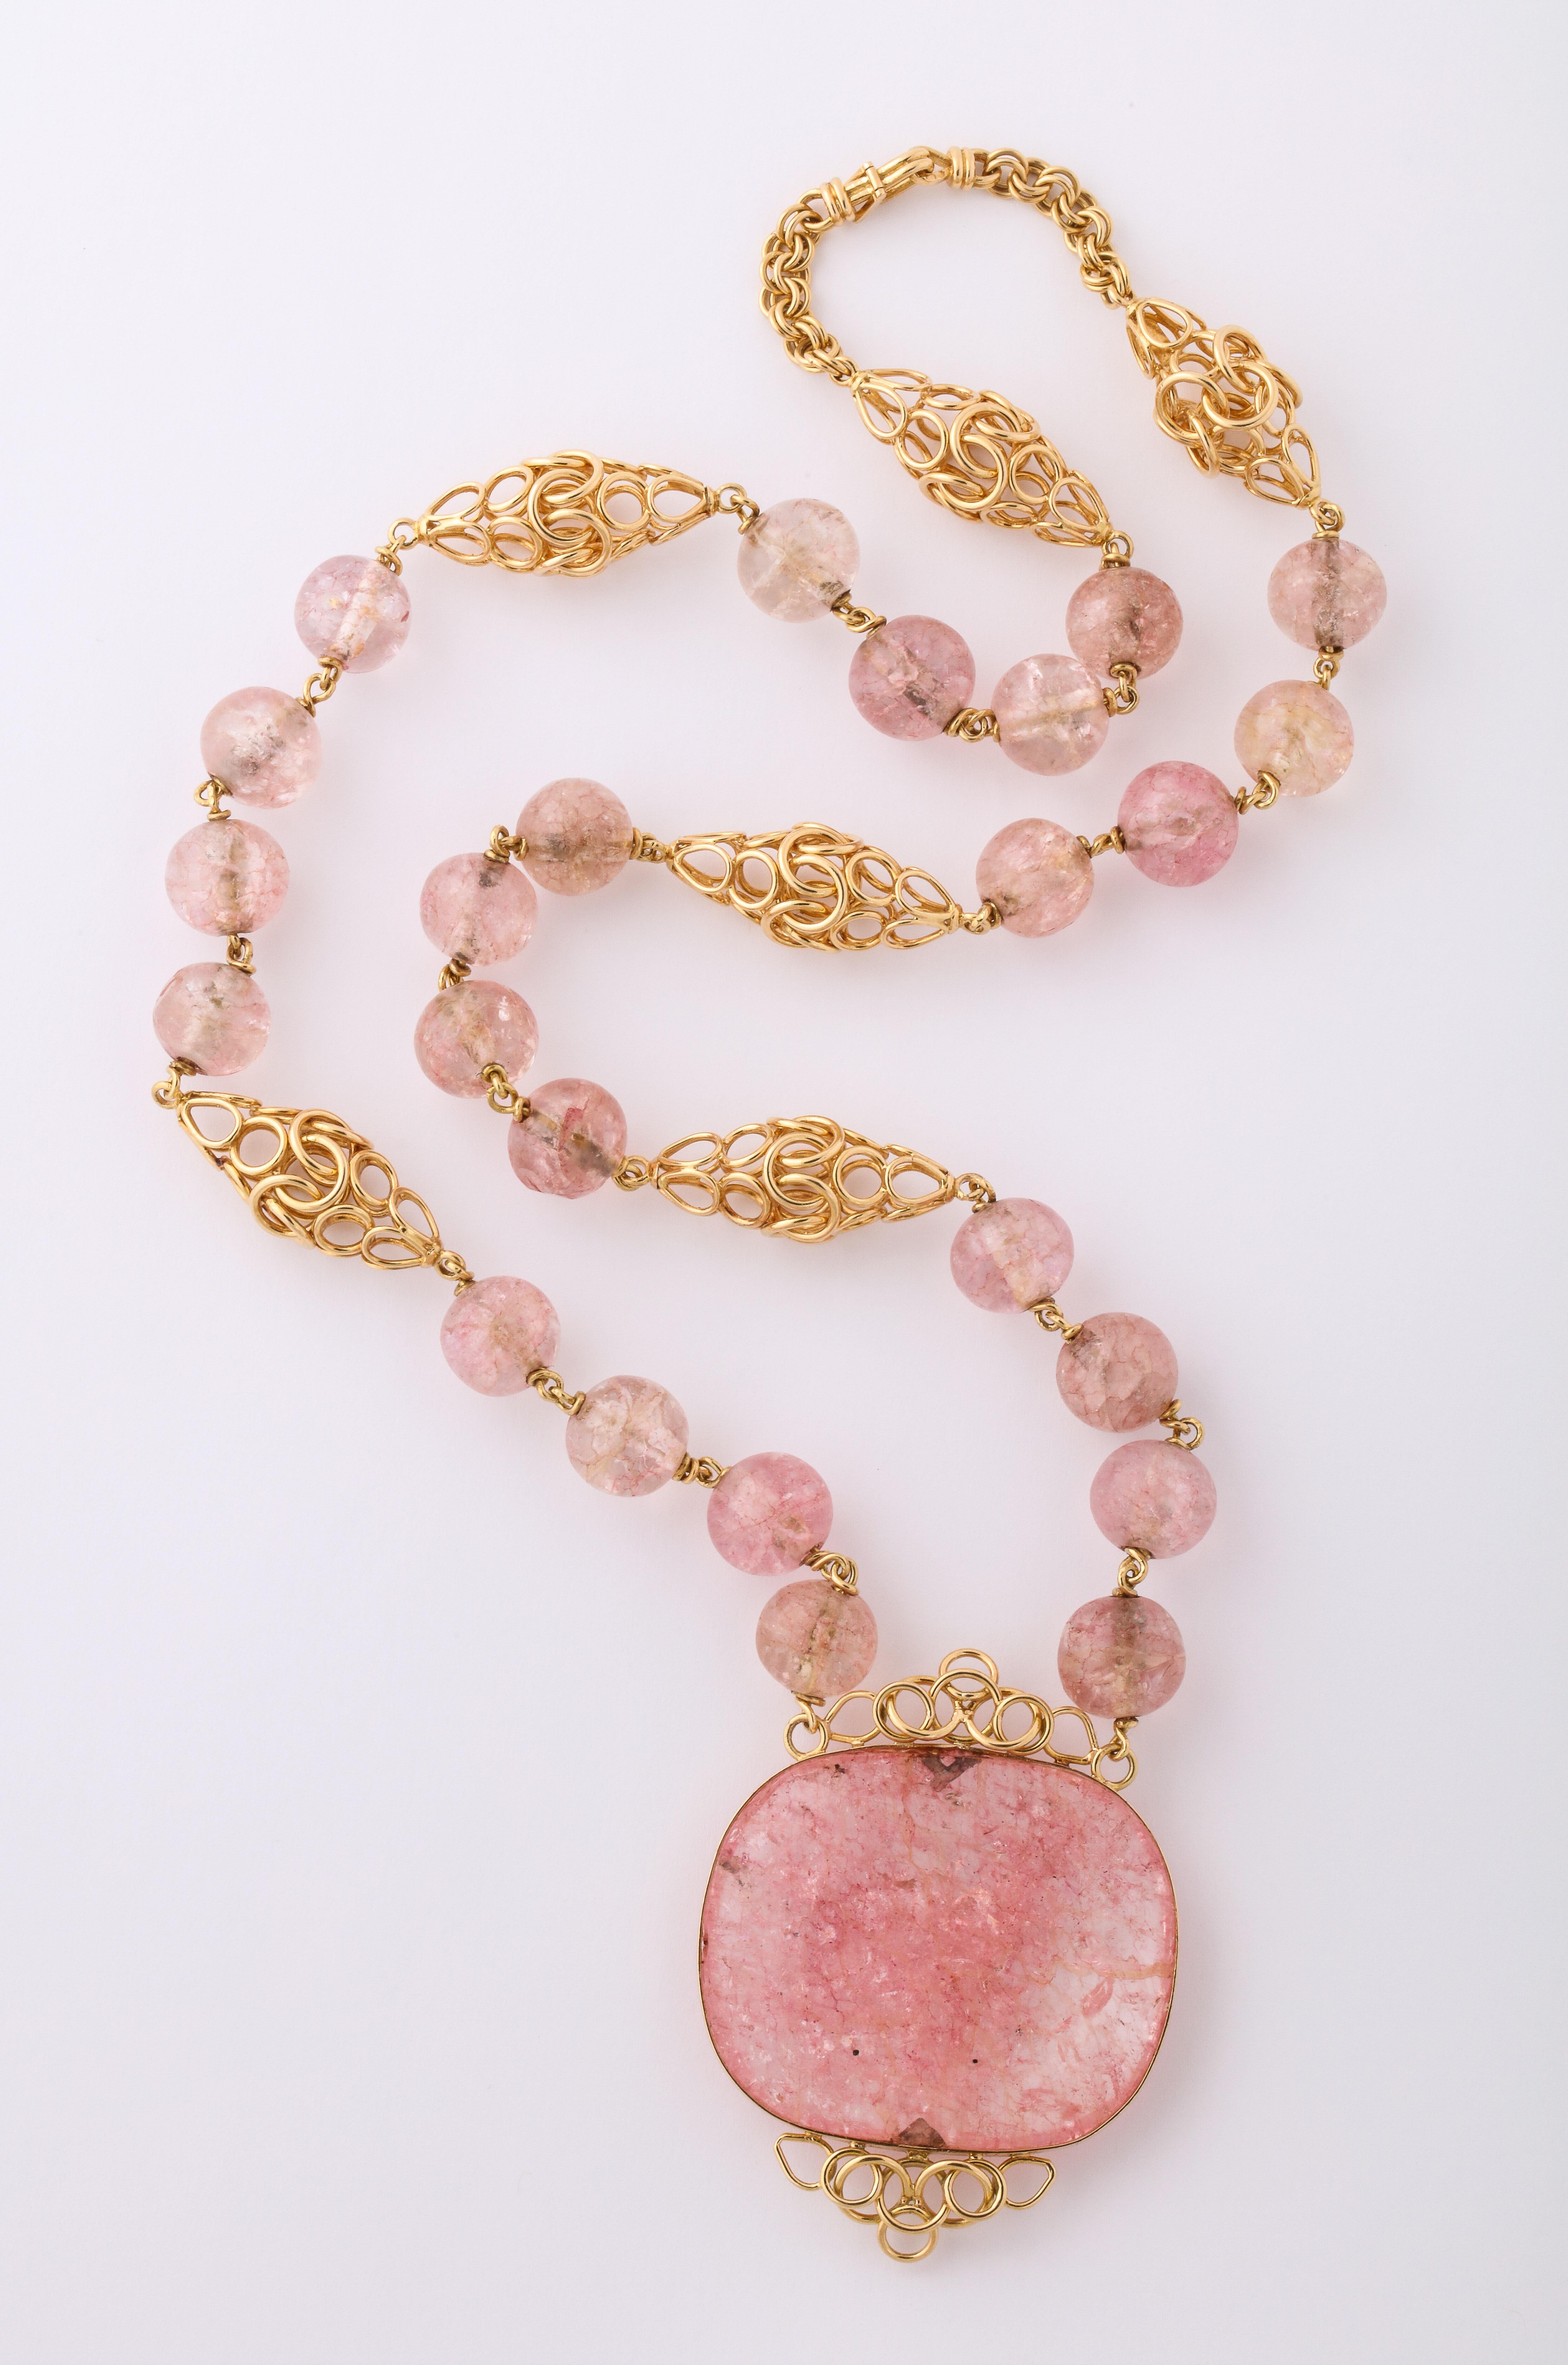 Cartier Paris Rose Quartz handmade necklace, circa 1980.  18k Yellow Gold, 126 grams.  28 inches long x 1 3/4 inches wide and 1/2 inch deep.  Hallmarks on the catch.

Materials:
18k Yellow Gold, 126 grams

Stones:
Rose Quartz

Measurements:
28